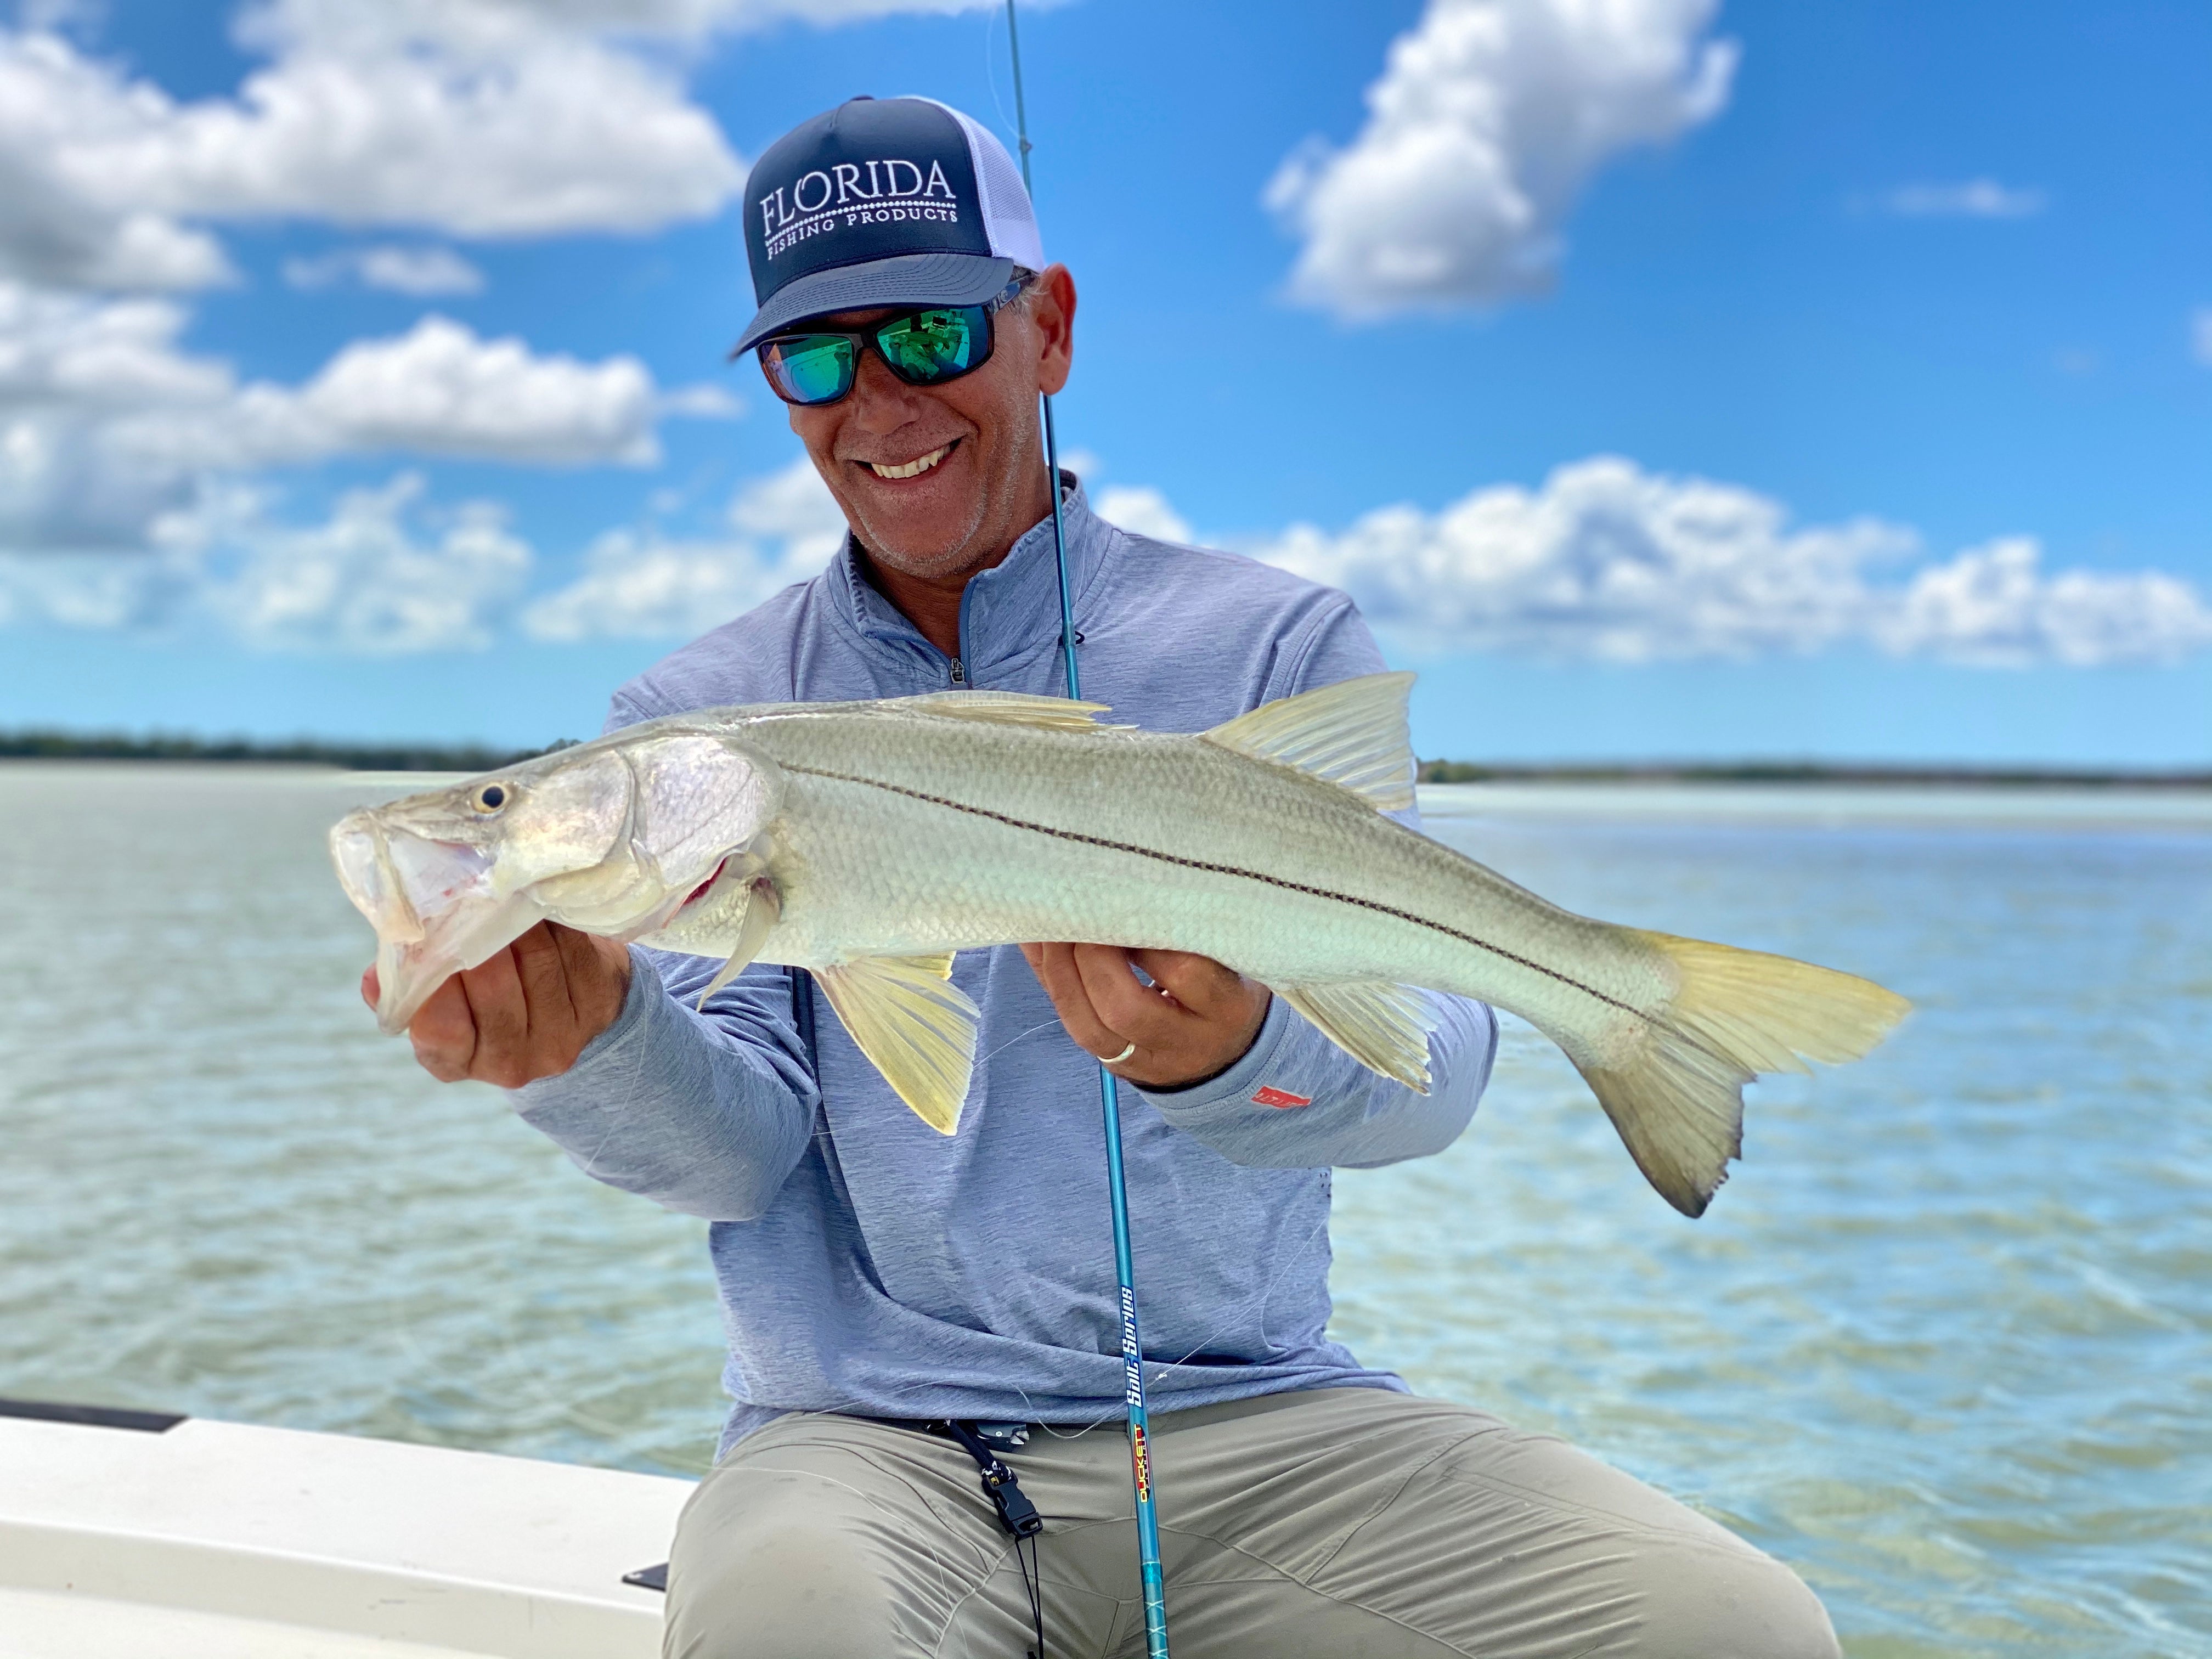 2020 Father's Day Fishing Gifts for Dad – Florida Fishing Products